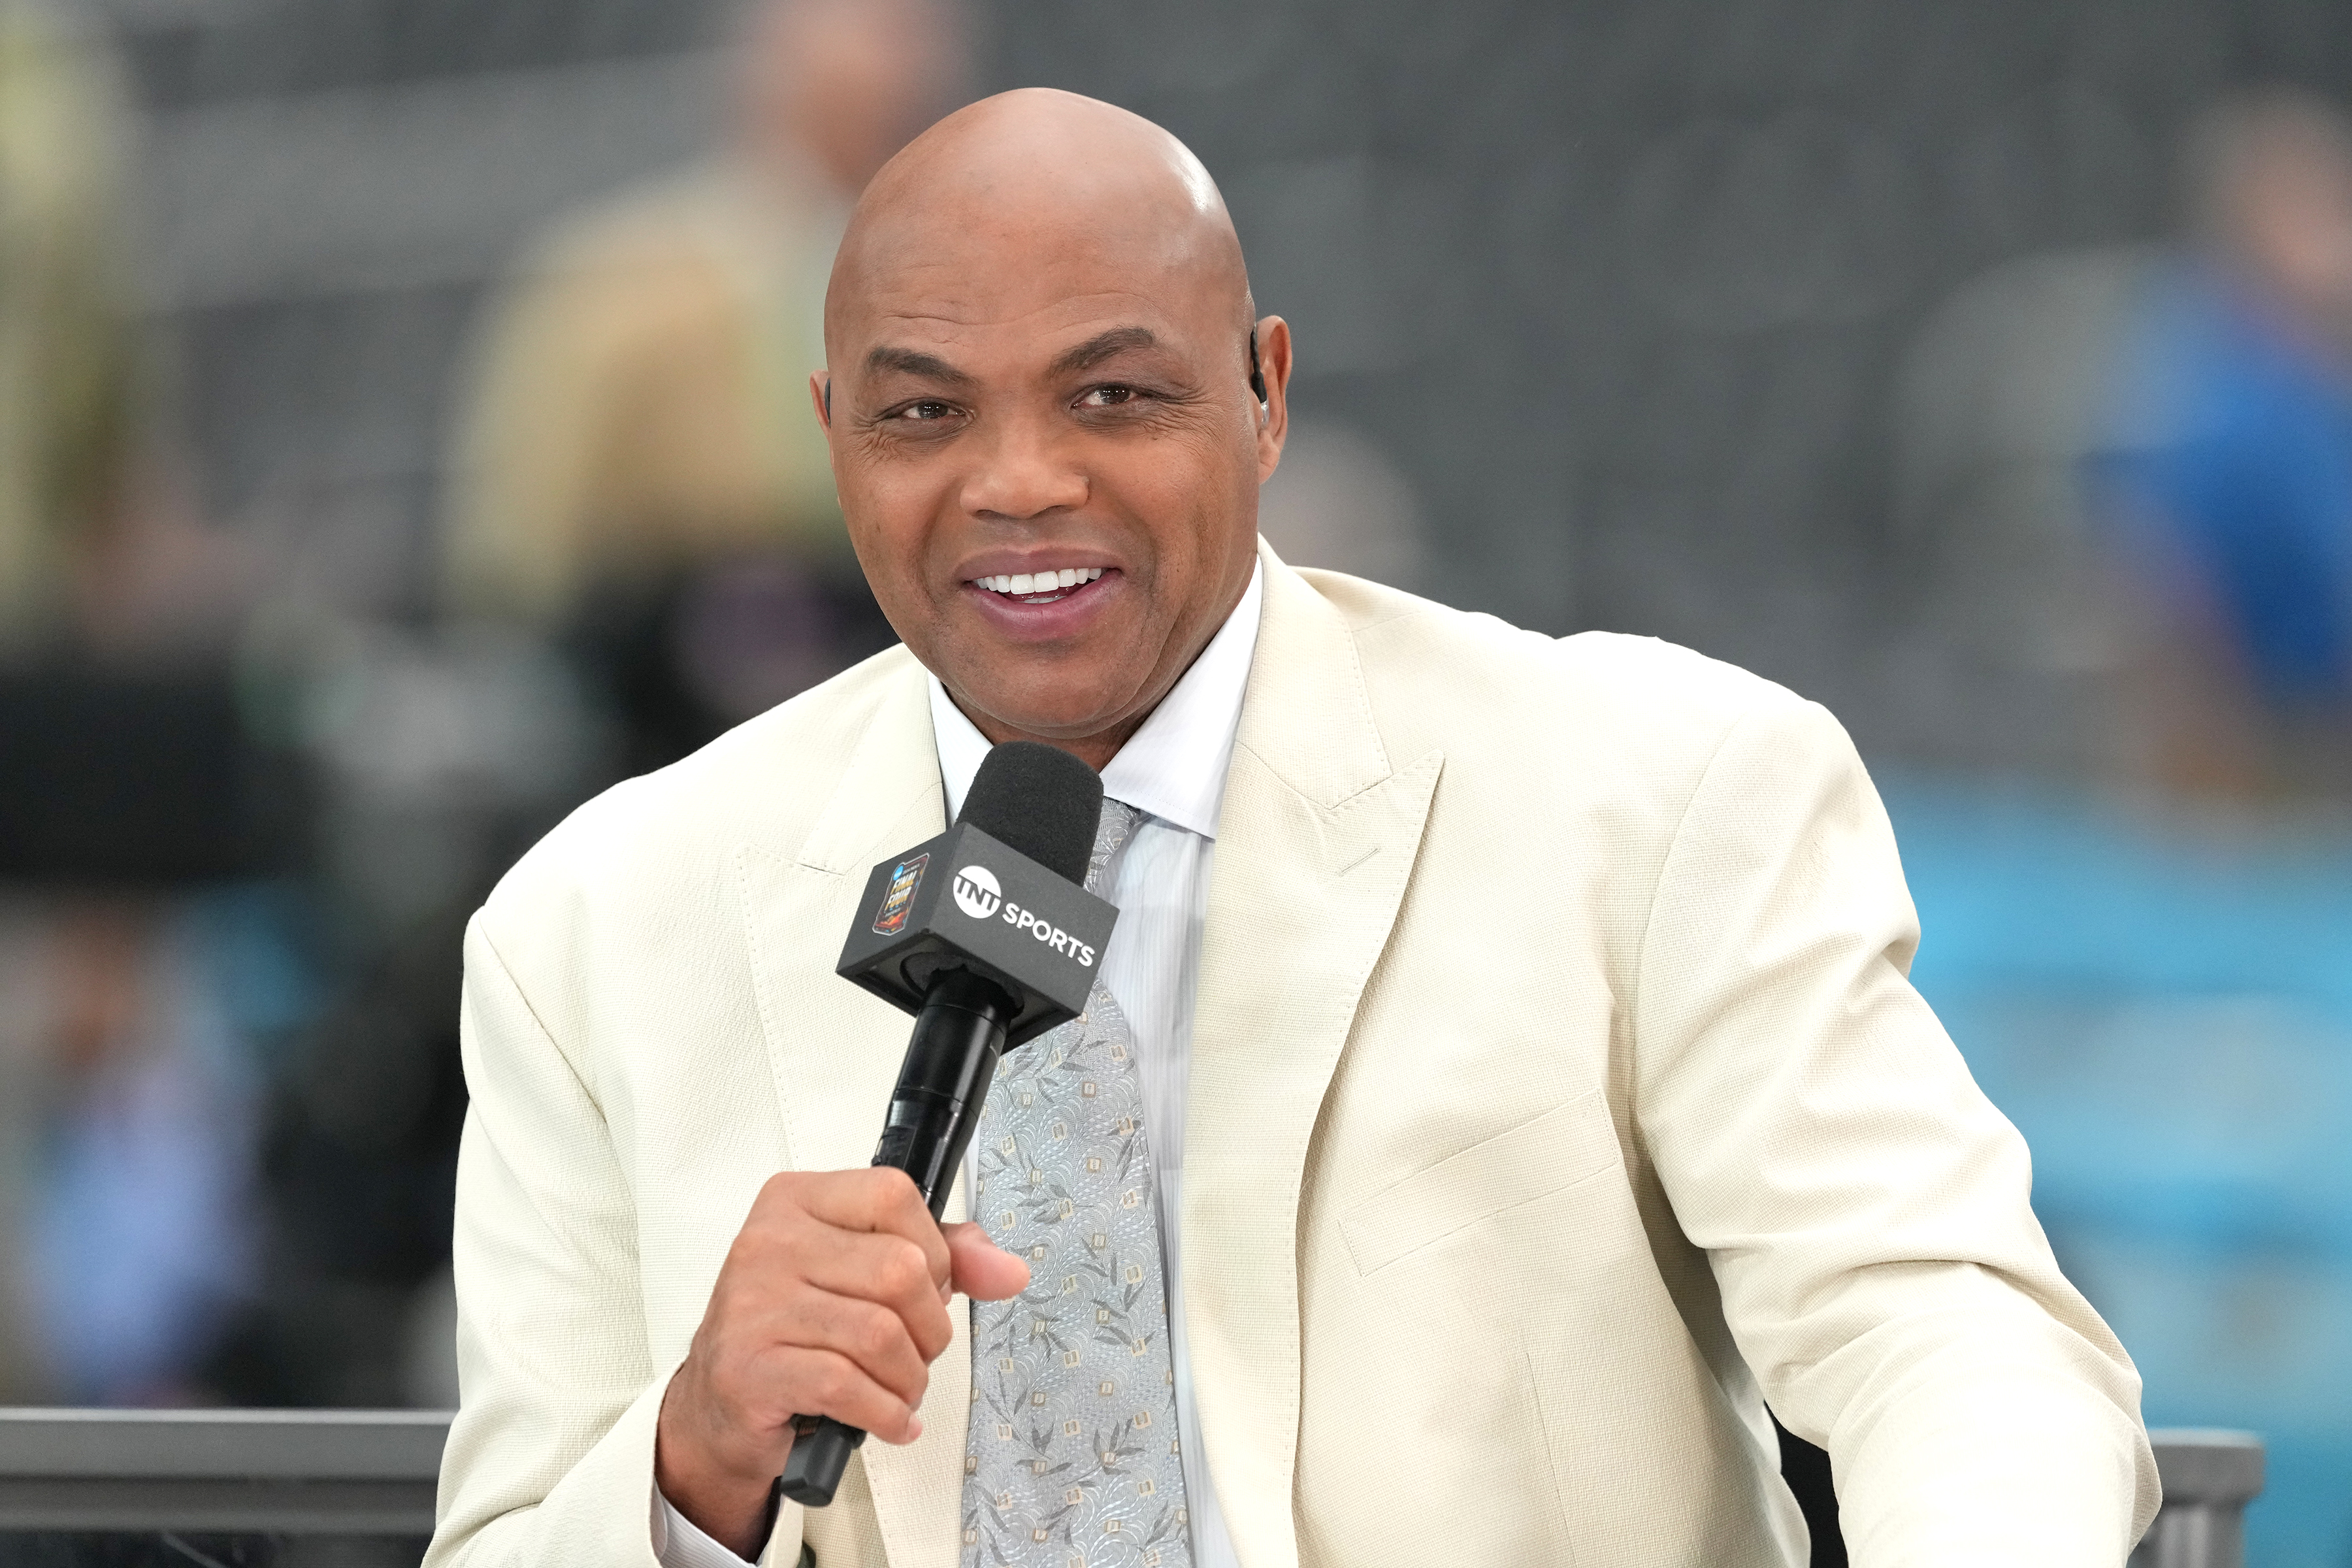 Charles Barkley, wearing a white suit coat and a silver tie, smiling as he speaks into a black microphone in front of a blurred background.